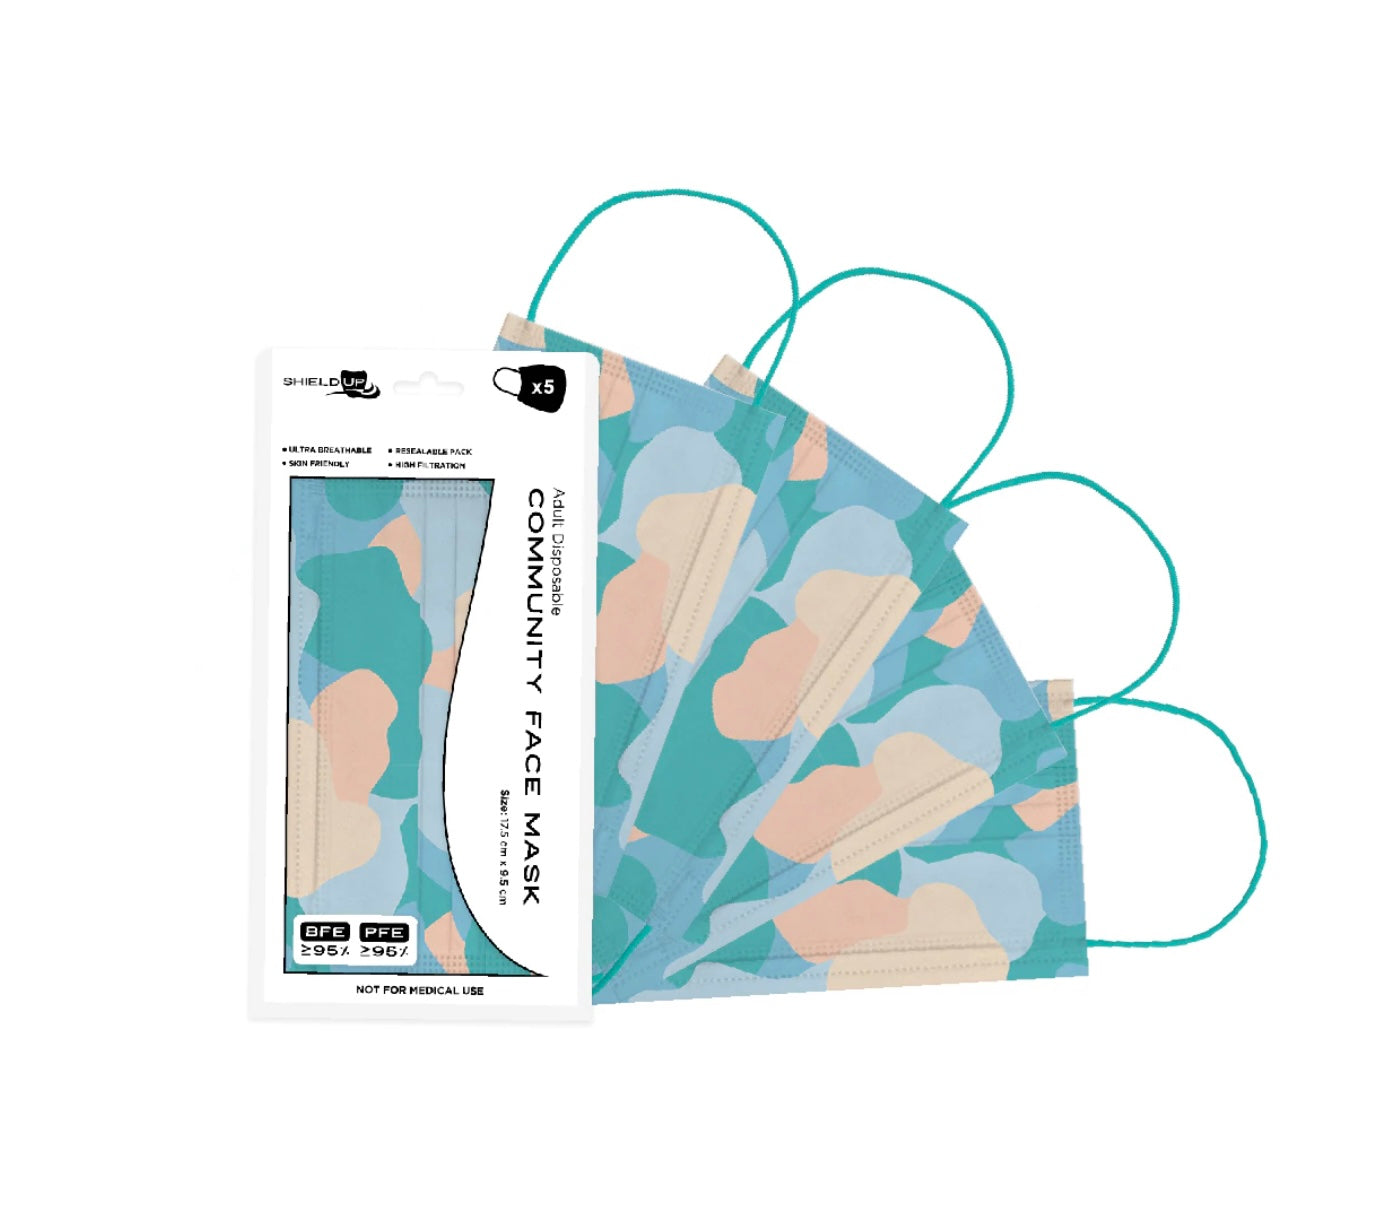 SHIELD UP Disposable Face Mask - Beachfront (5 Pack)